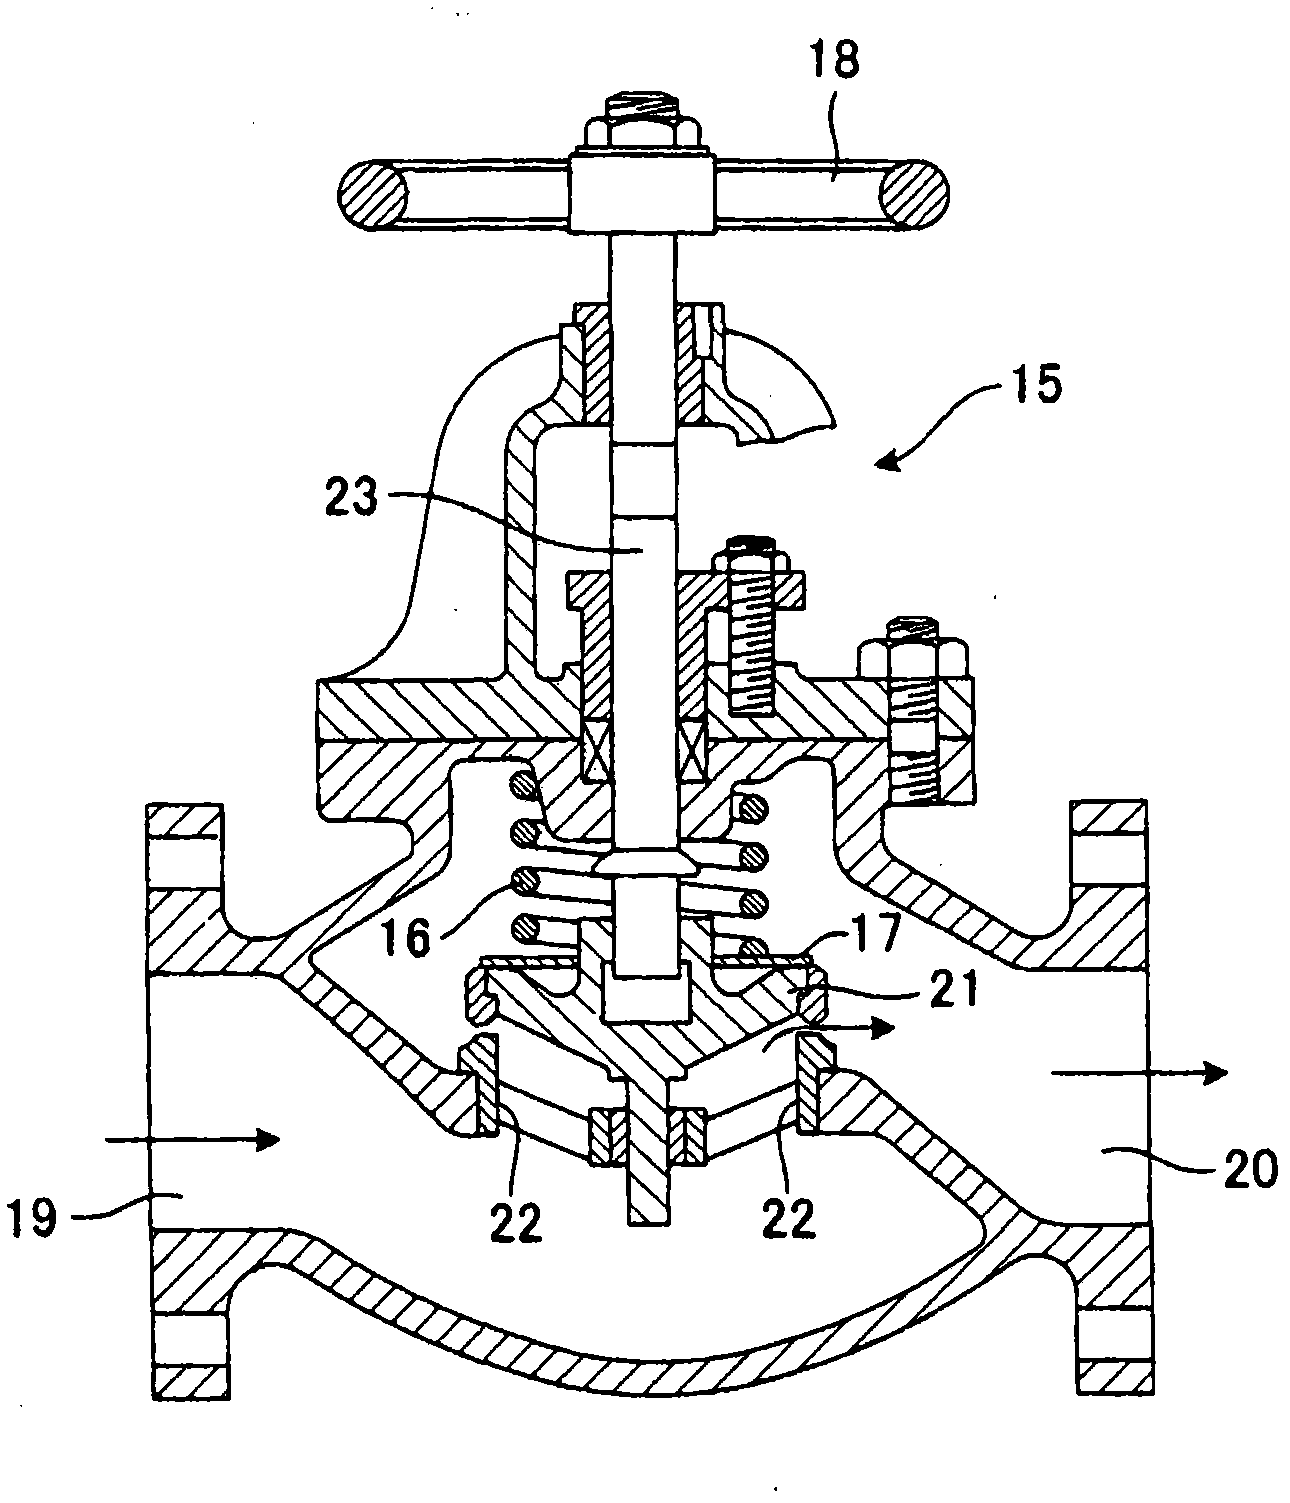 Apparatus for transporting fuel oil